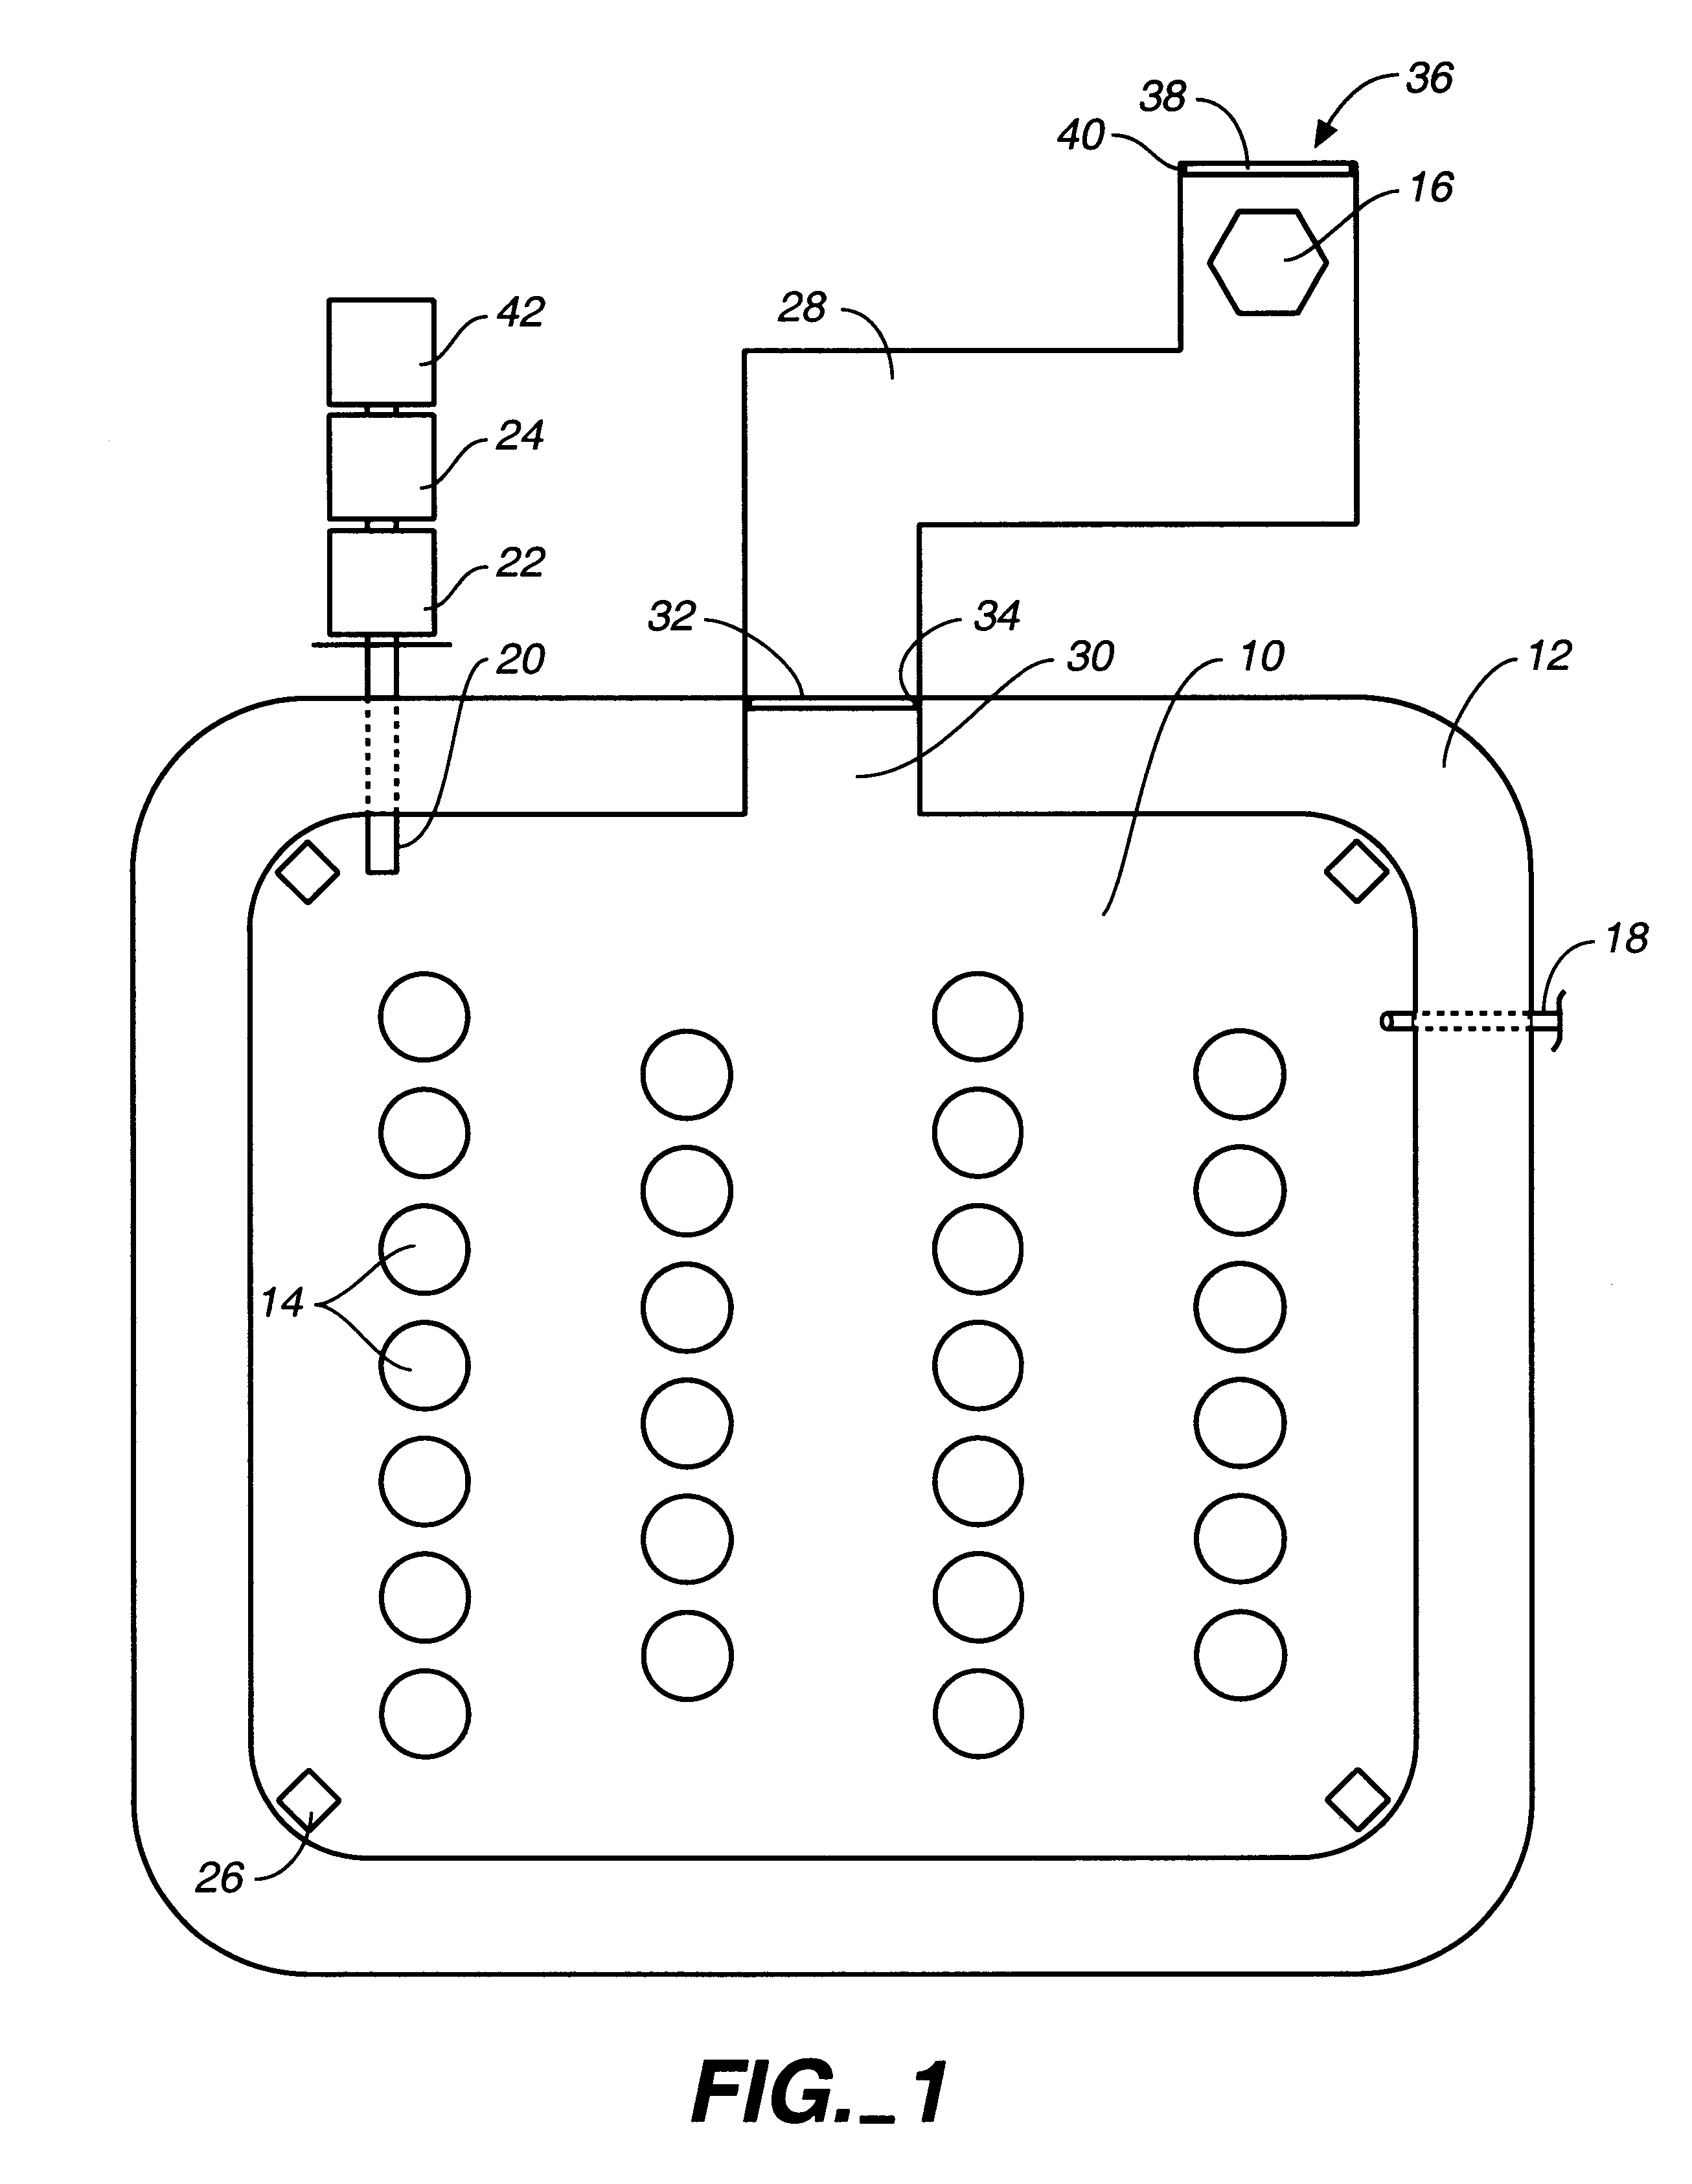 Method of using nuclear waste to produce heat and power